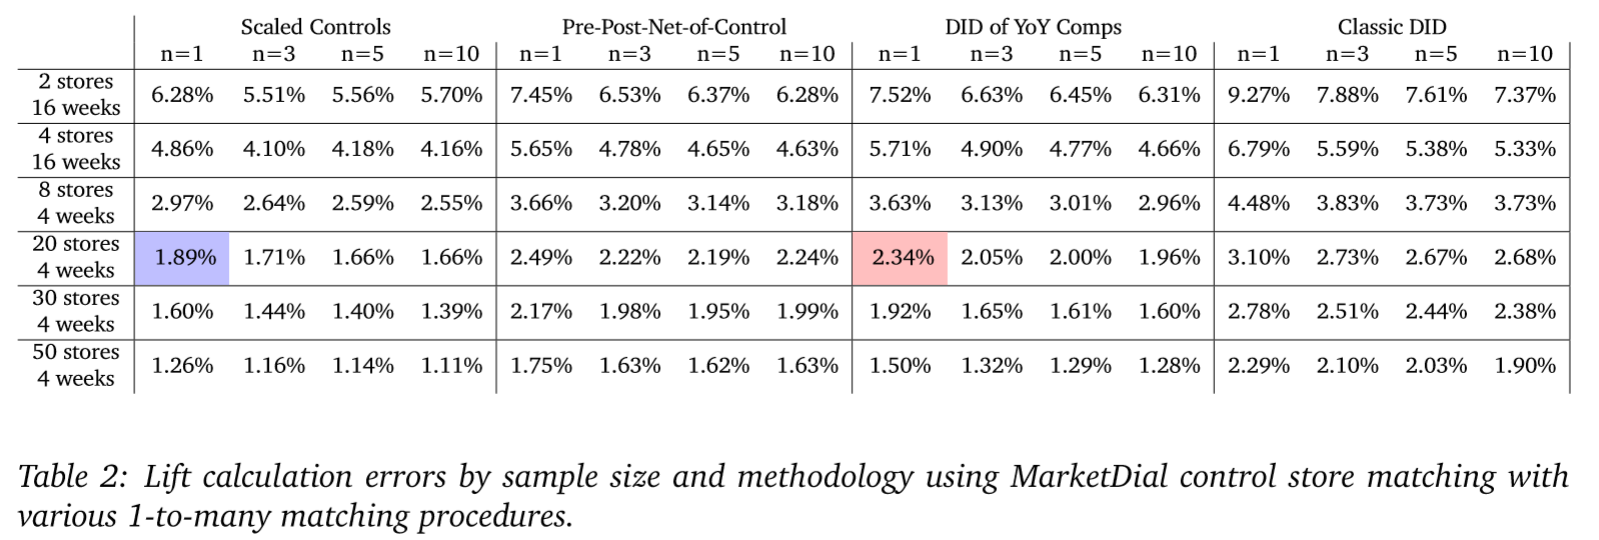 Lift calculation errors by sample size and methodology using MarketDial control matches with various 1-to-many matching procedures.